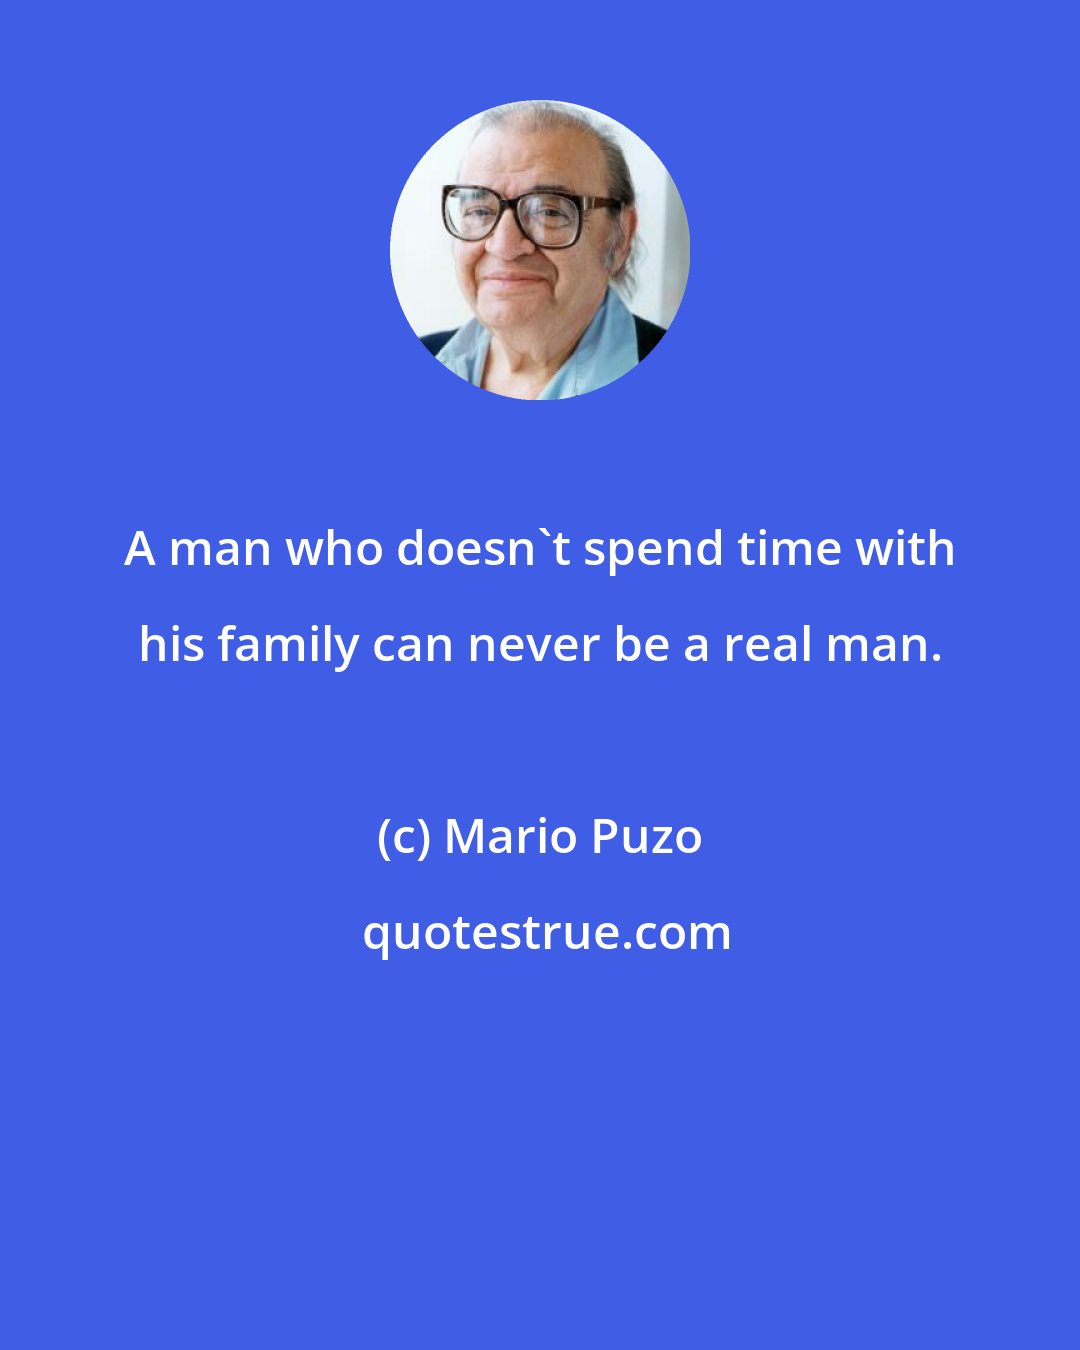 Mario Puzo: A man who doesn't spend time with his family can never be a real man.